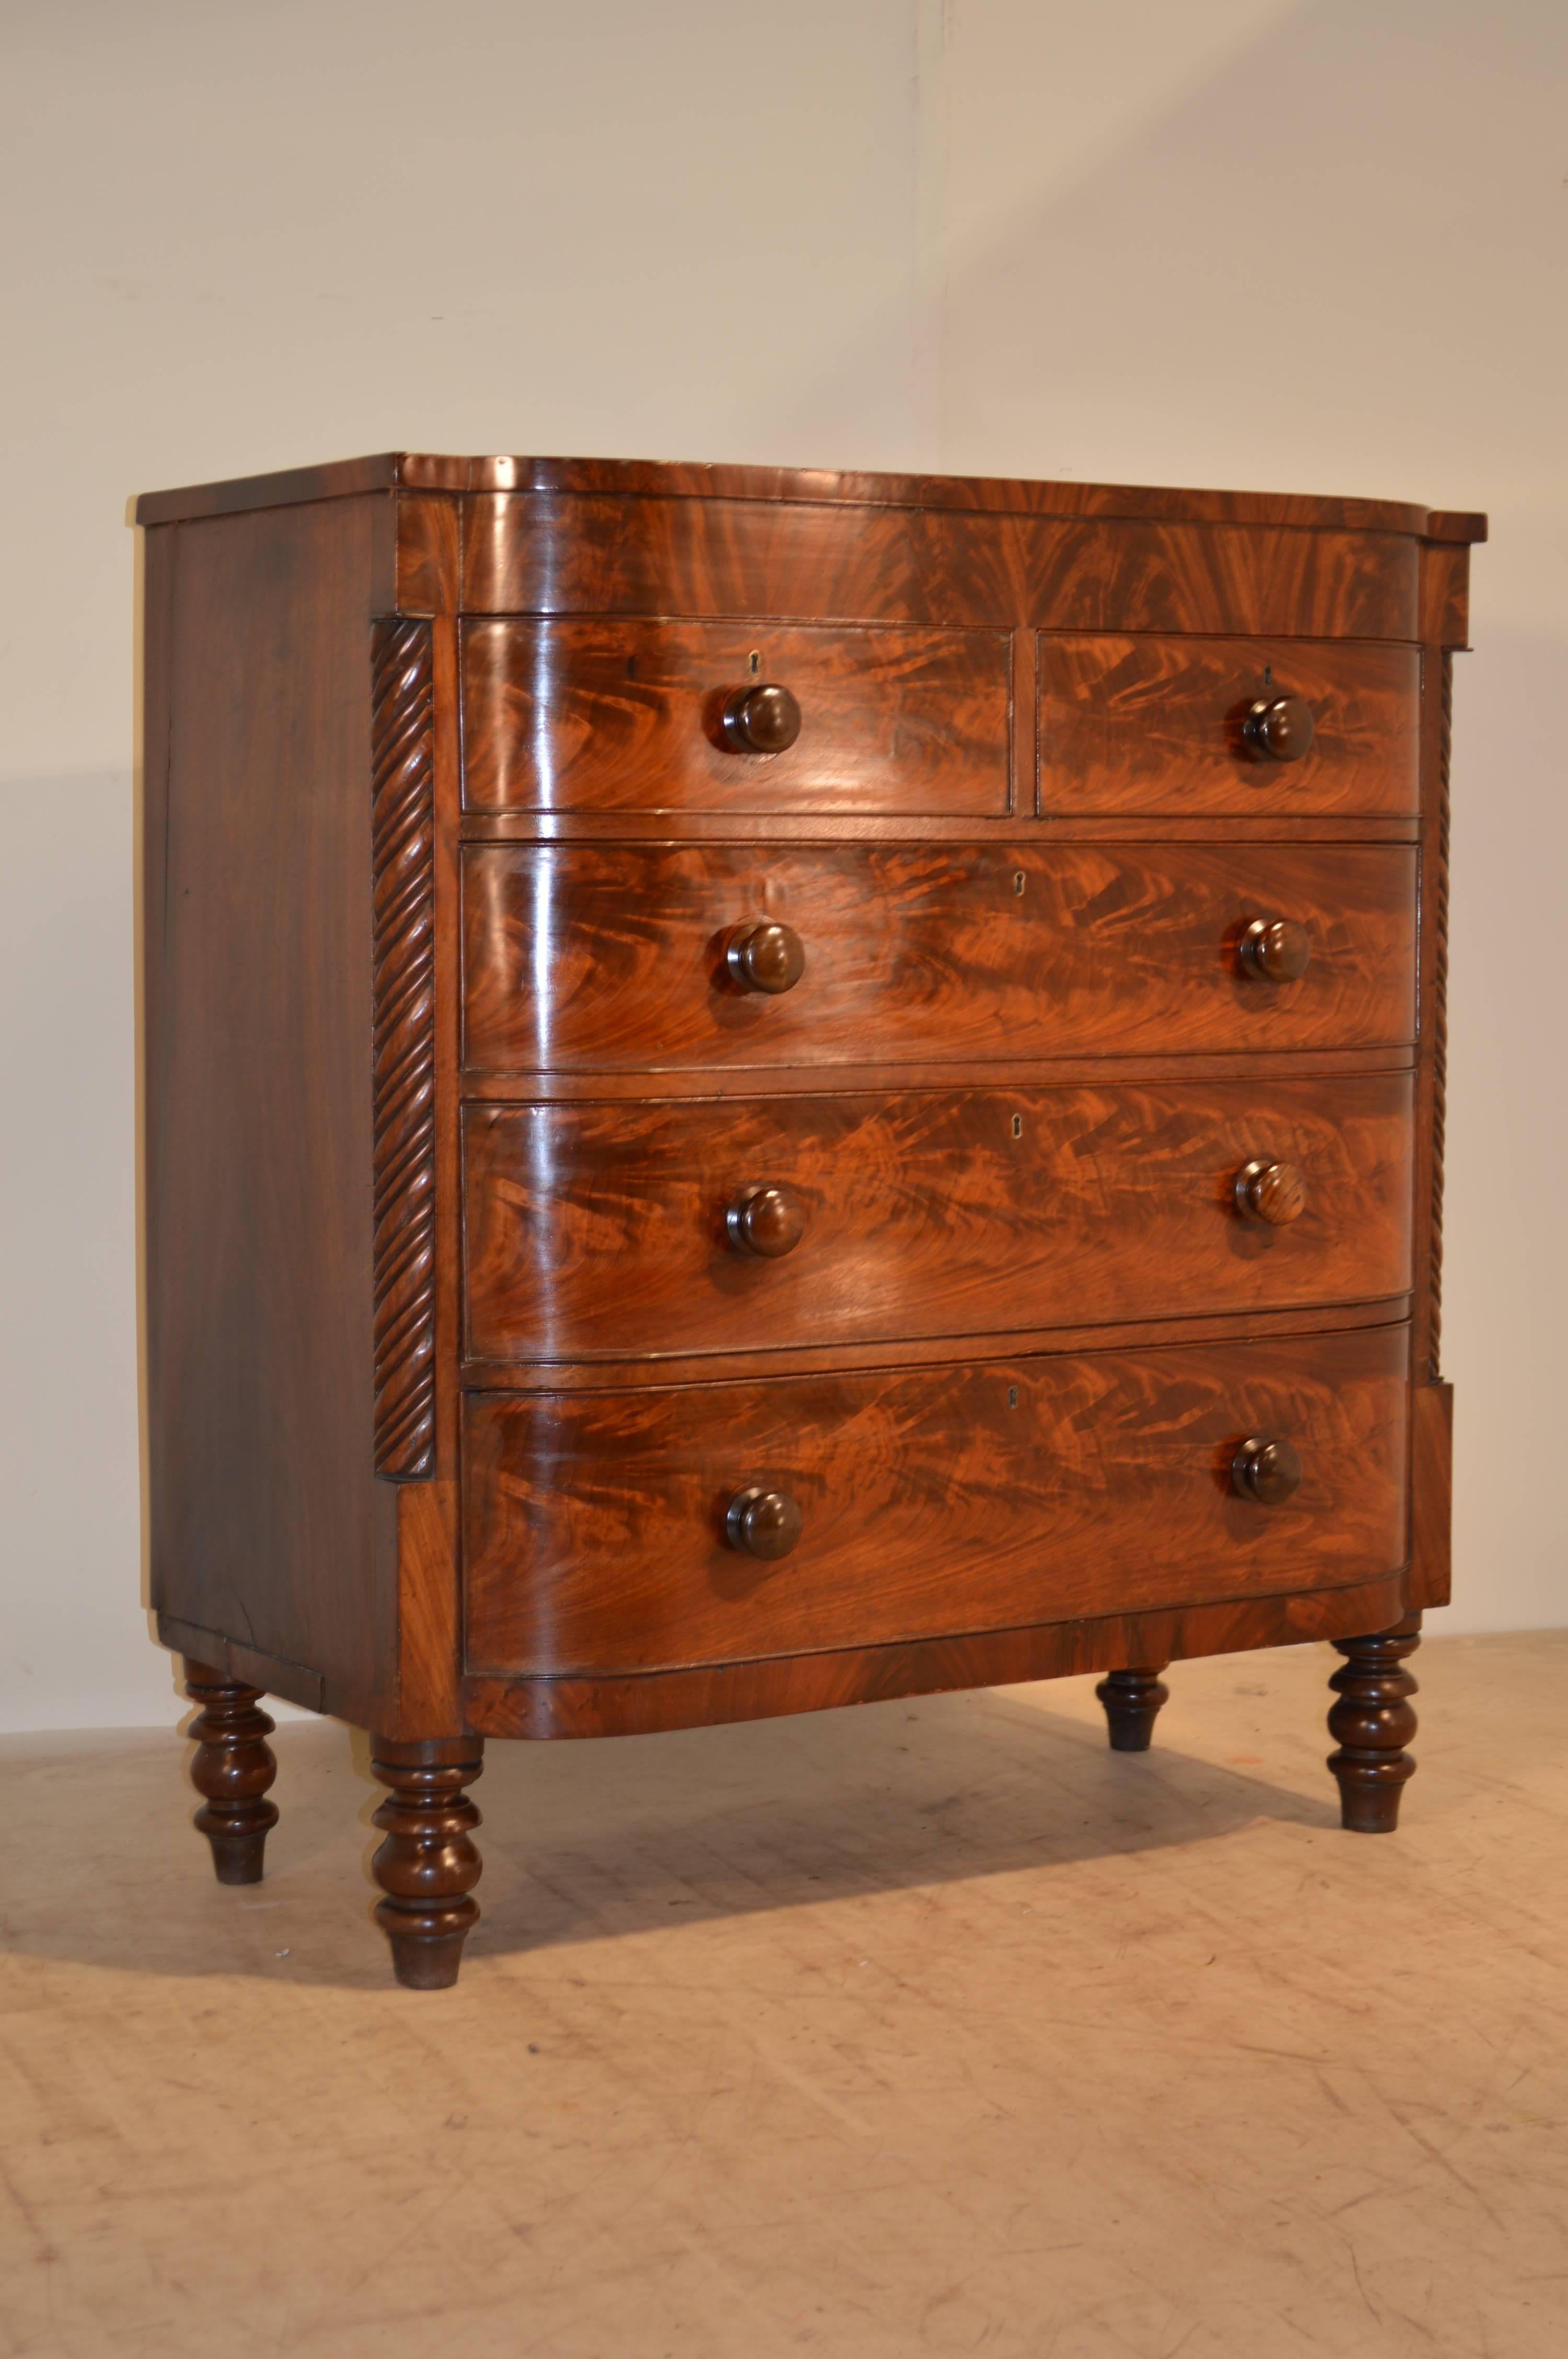 19th century English flame mahogany bow front chest on tall, turned feet. Piece has two small drawers and three larger drawers, flanked by hand-carved twist-design quarter columns. Top has some small veneer repairs around the edges. Age wear,